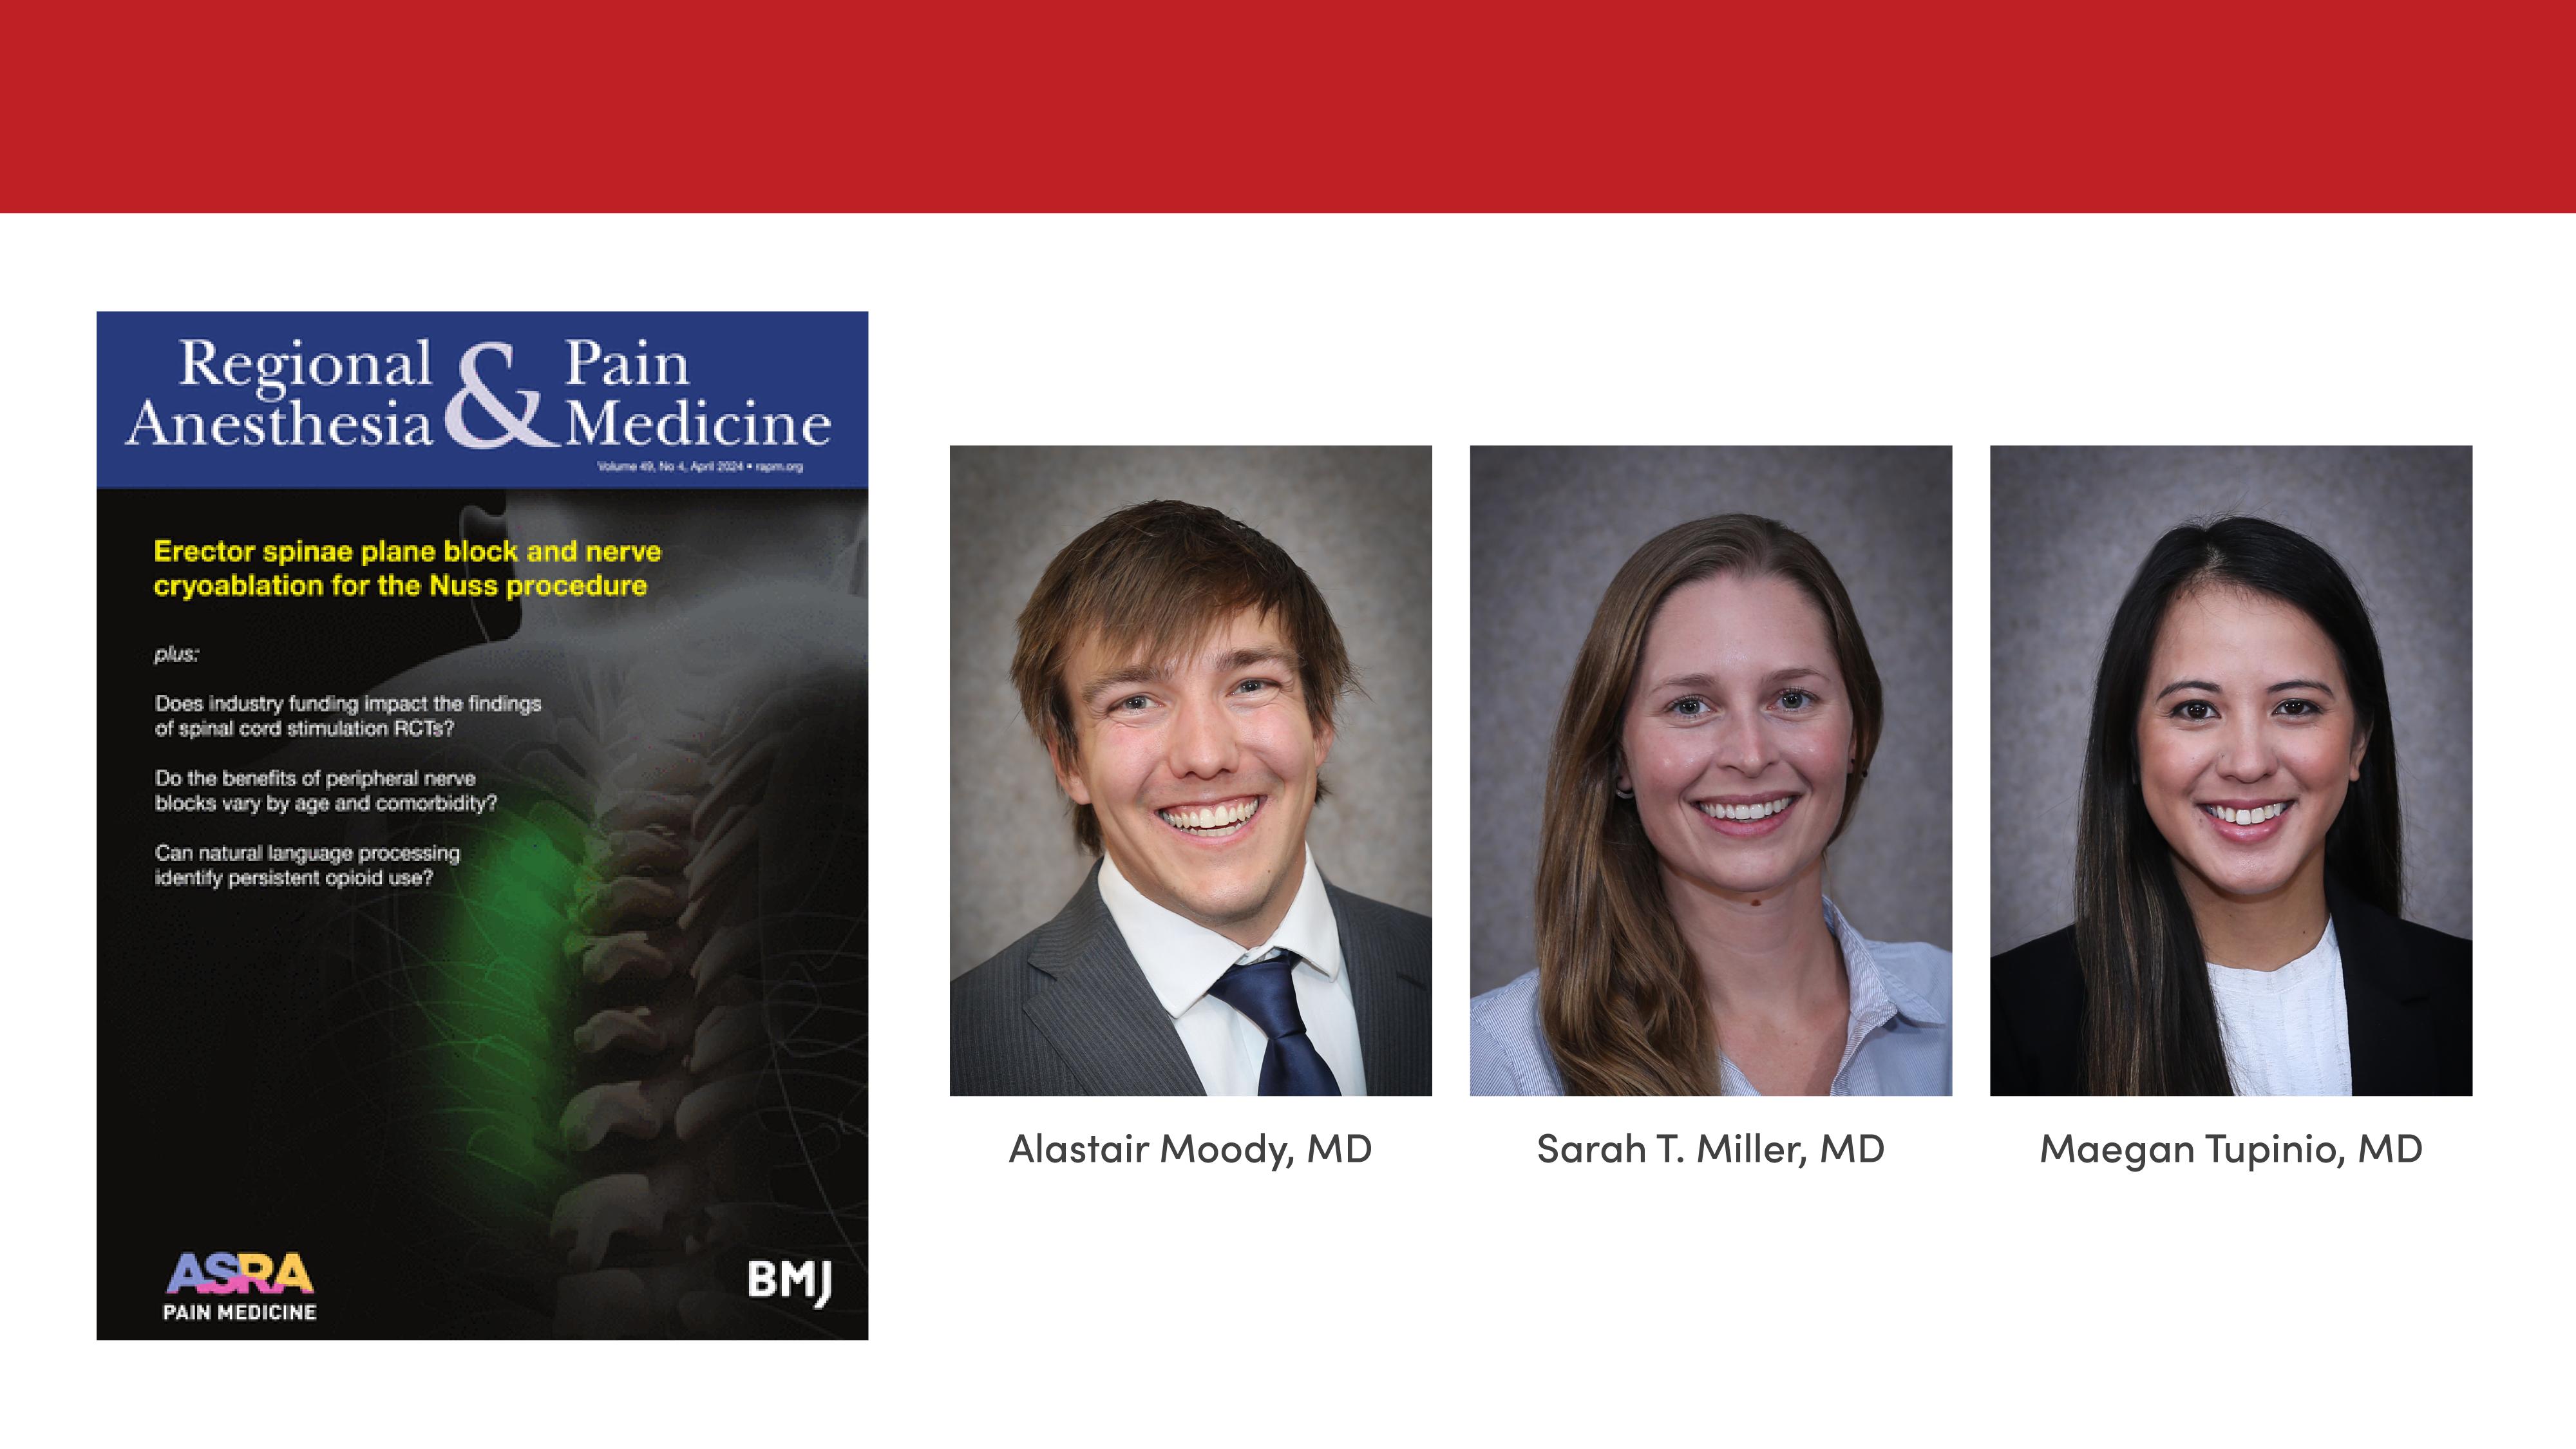 Portraits of Drs. Moody, Miller, and Tupinio next to the cover of the publication their article is in.